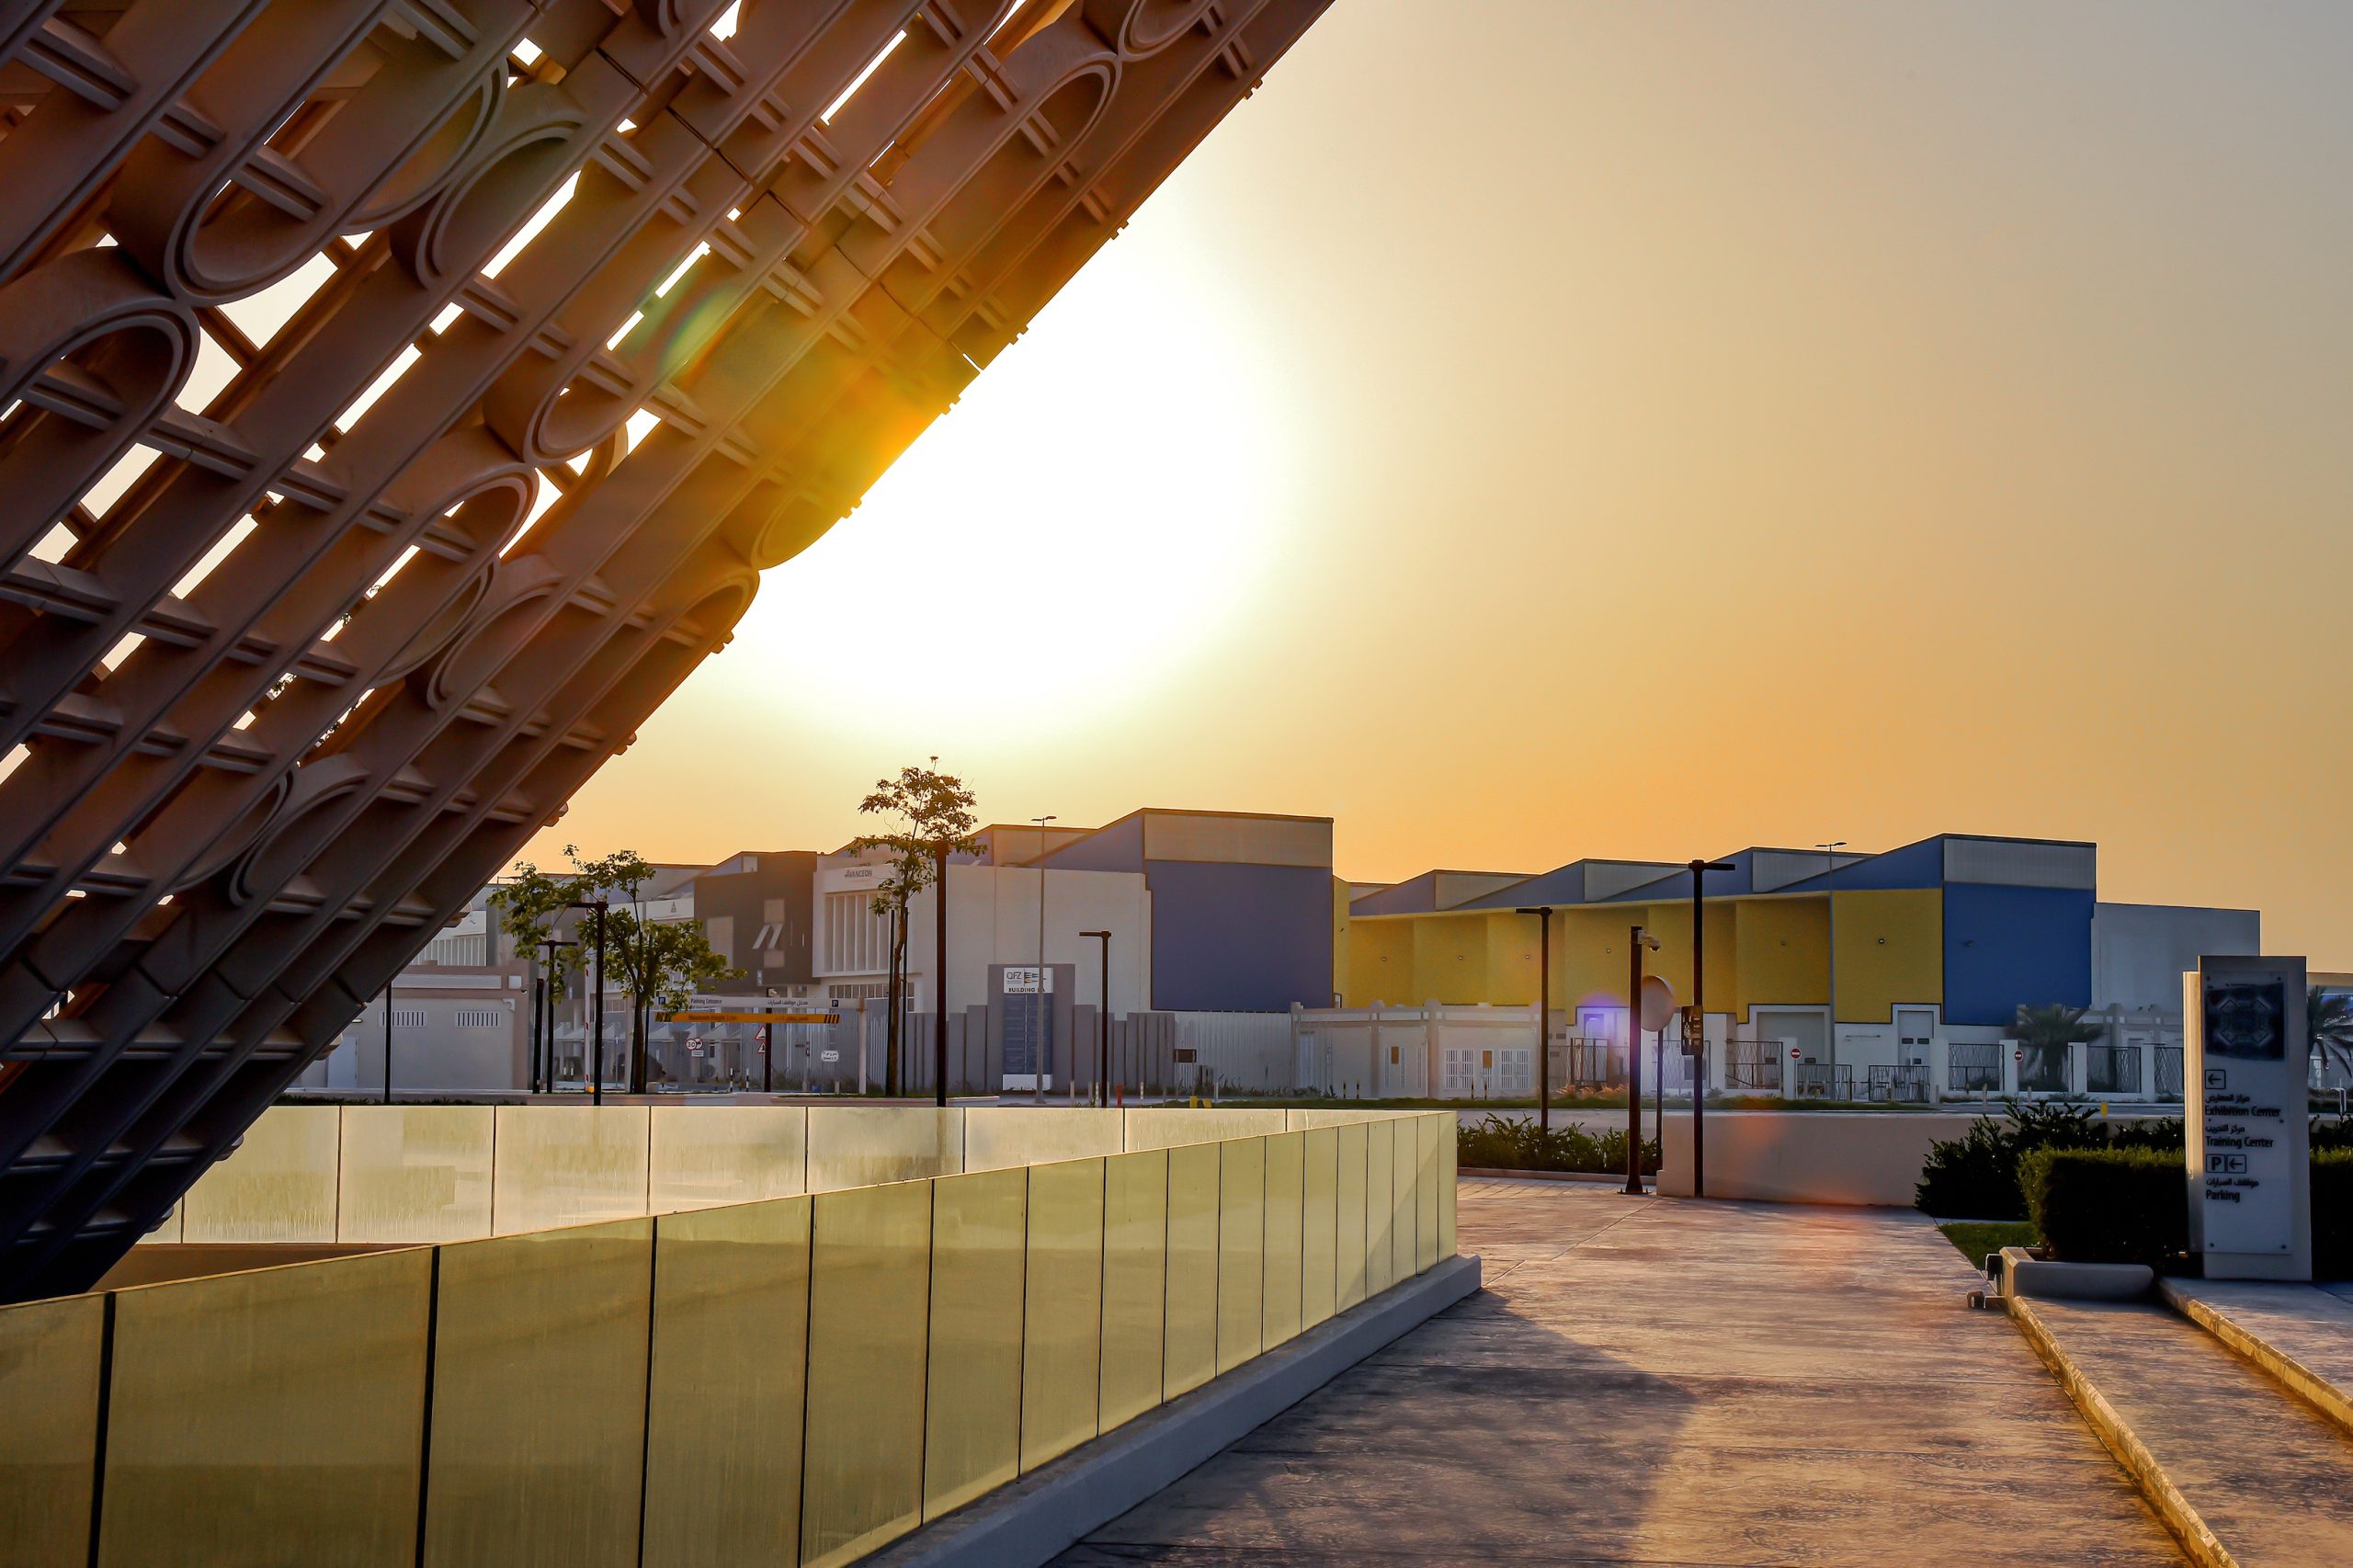 Image of the Business Innovation Park and Light Industrial Units at the Ras Bufontas Free Zone